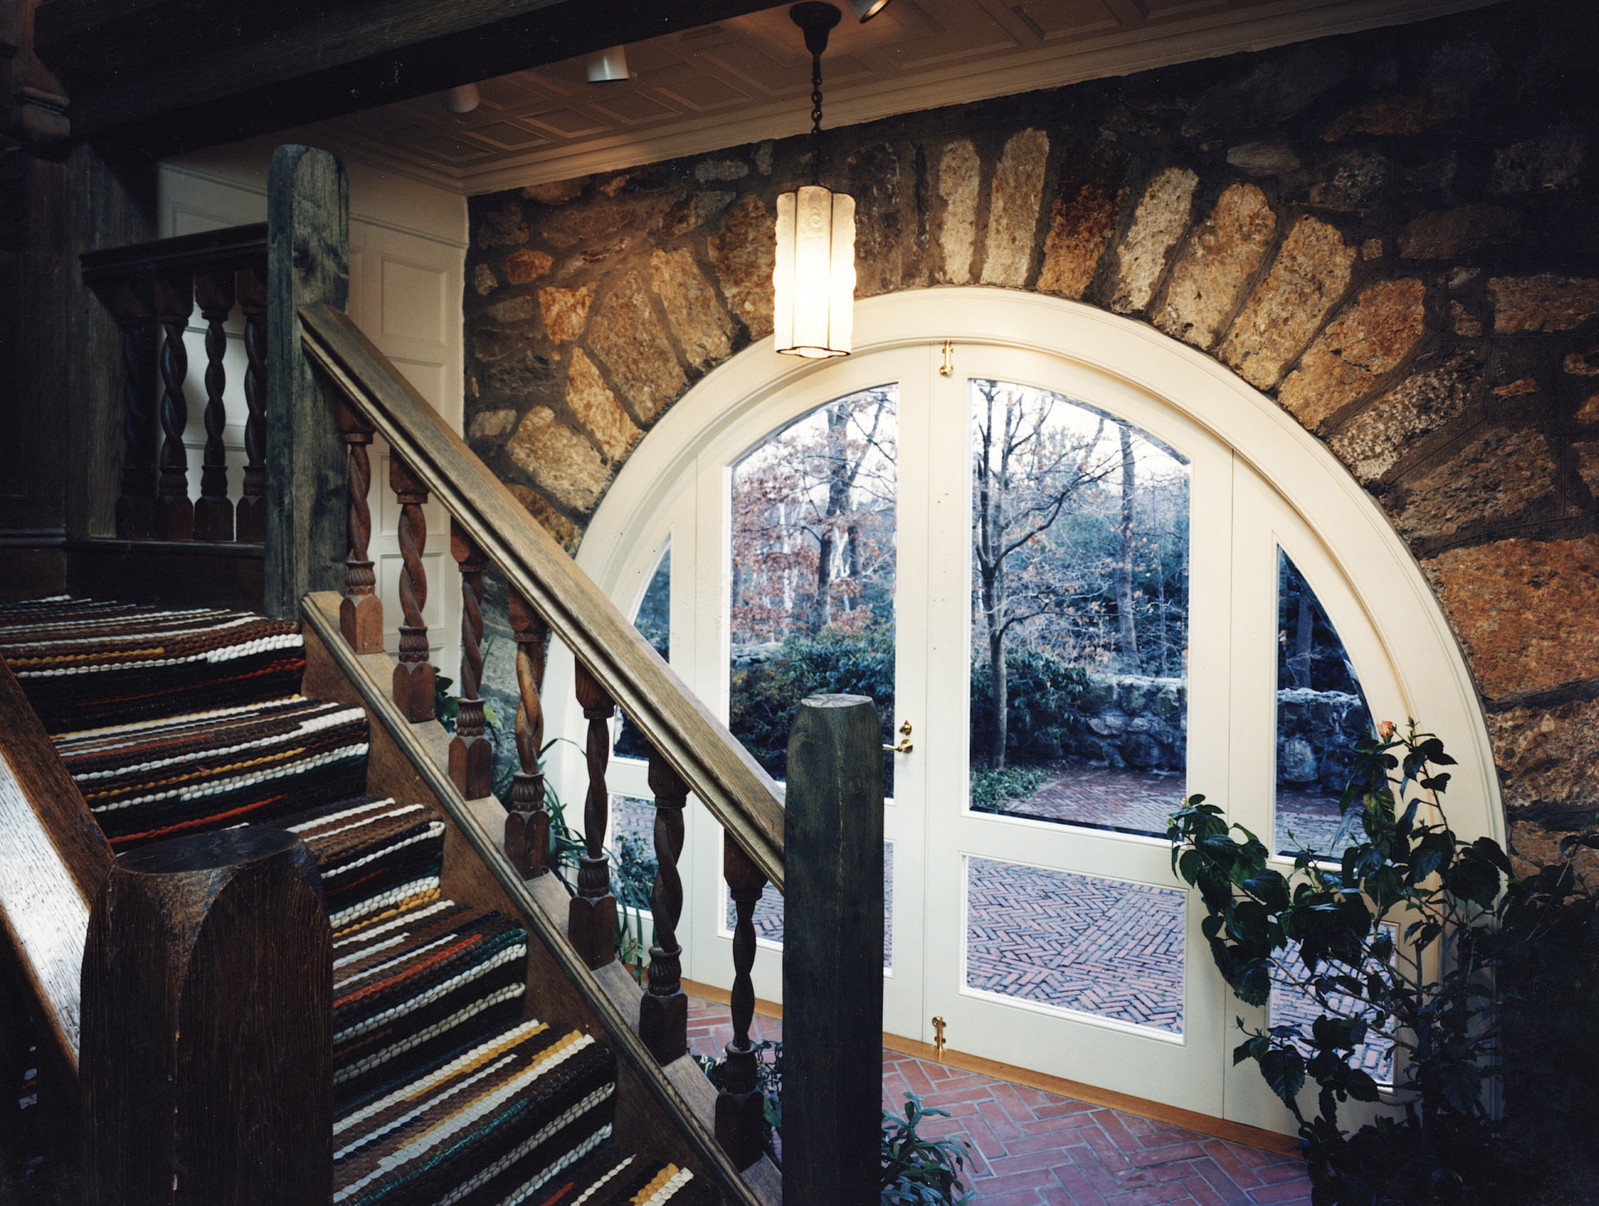 Our curved work fits perfectly with this stone entryway